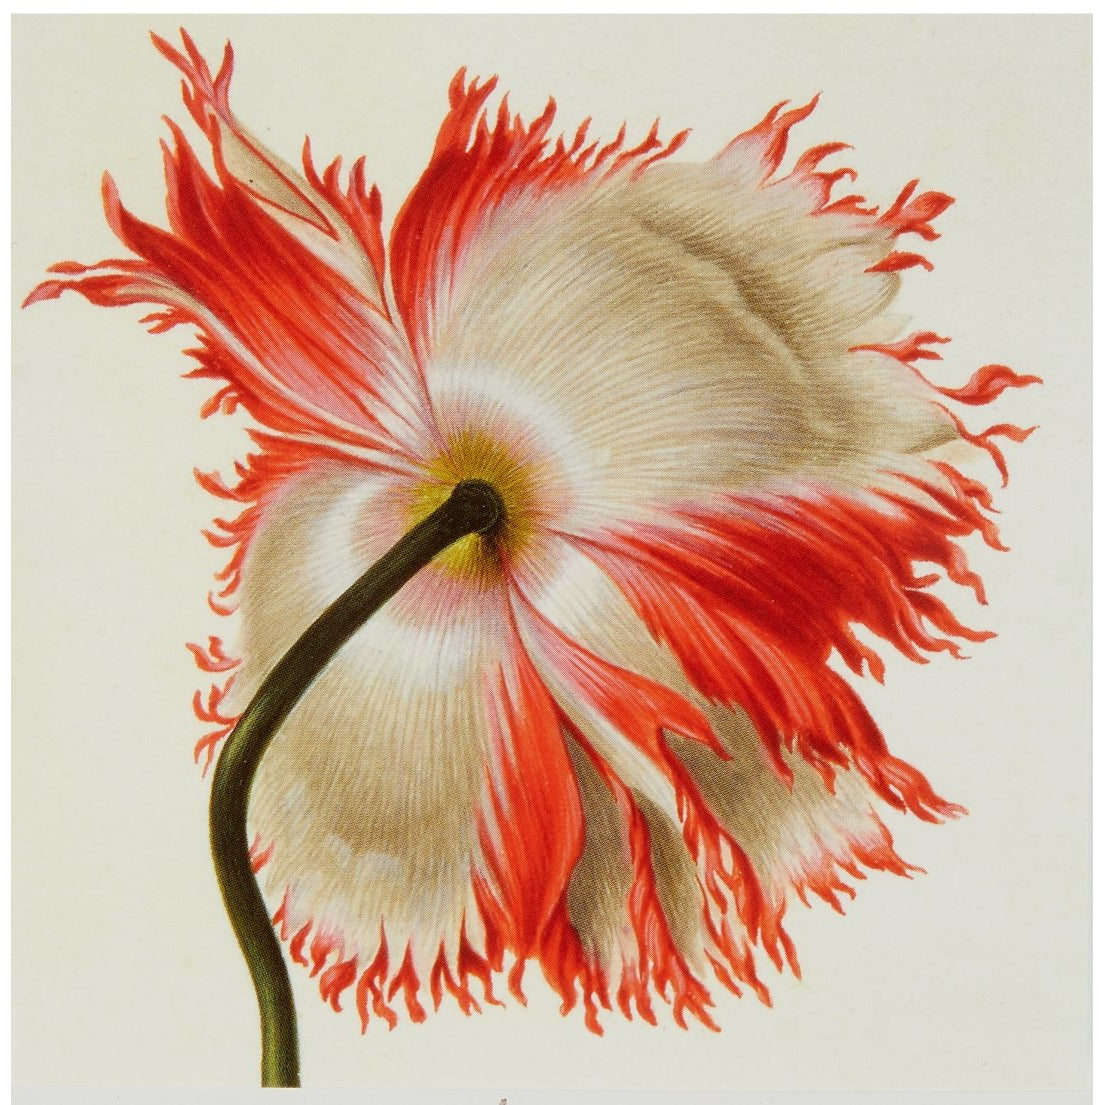 Notecard - Field Poppy, seen from behind by Pieter Withoos. From the Broughton collection of the Fitzwilliam Museum, brought to you by CuratingCambridge.co.uk